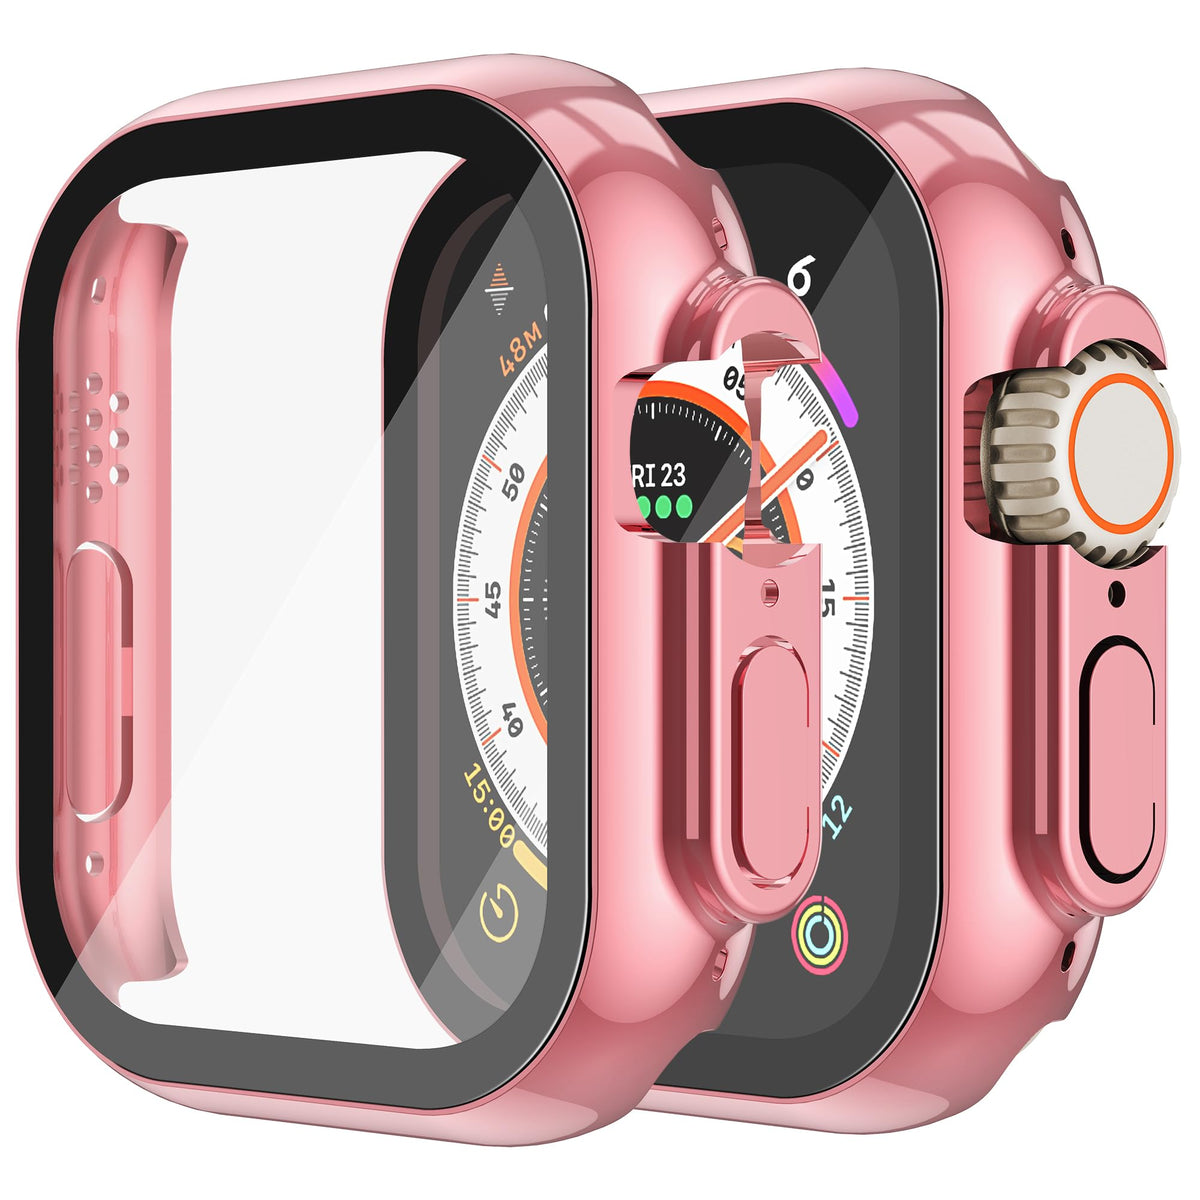 Misxi 2 Pack Hard PC Case with Tempered Glass Screen Protector Compatible with 49mm Apple Watch Ultra 2 / Ultra, Anti-Drop Scratch Resistant Lightweight Cover for iWatch, 1 Rose Pink + 1 Transparent